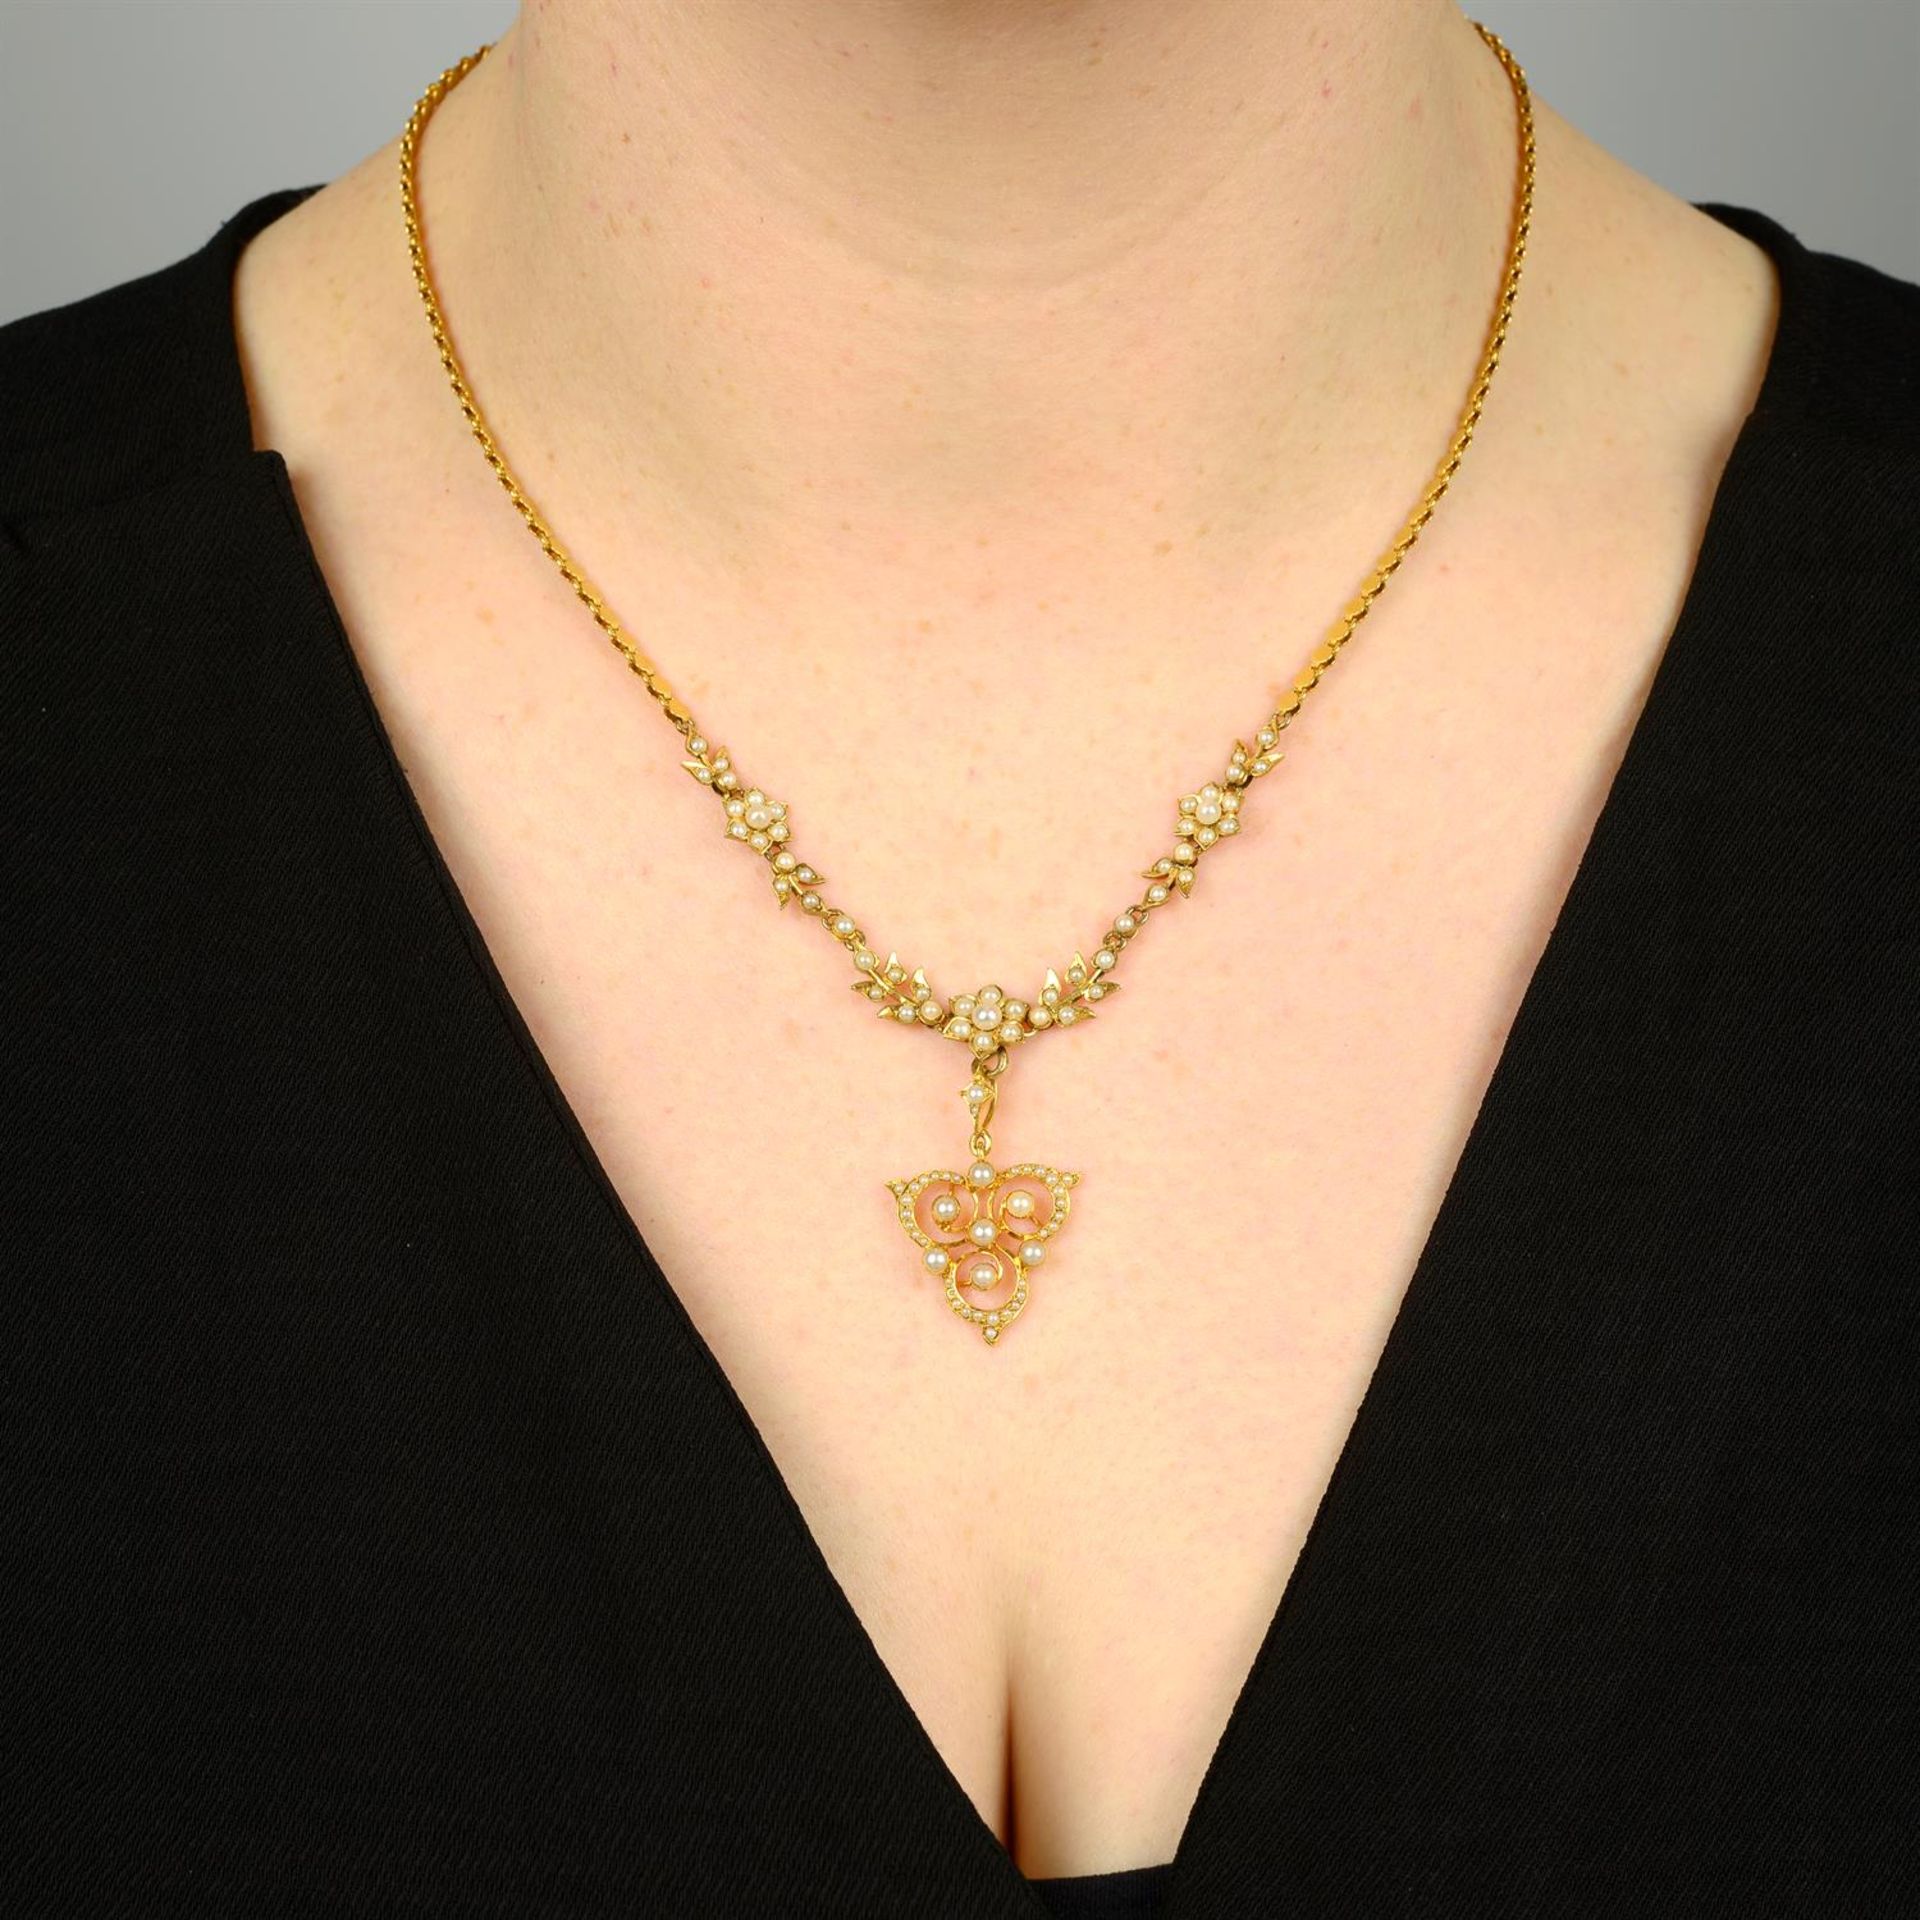 A composite early 20th century gold split pearl necklace, with detachable pendant. - Image 5 of 5